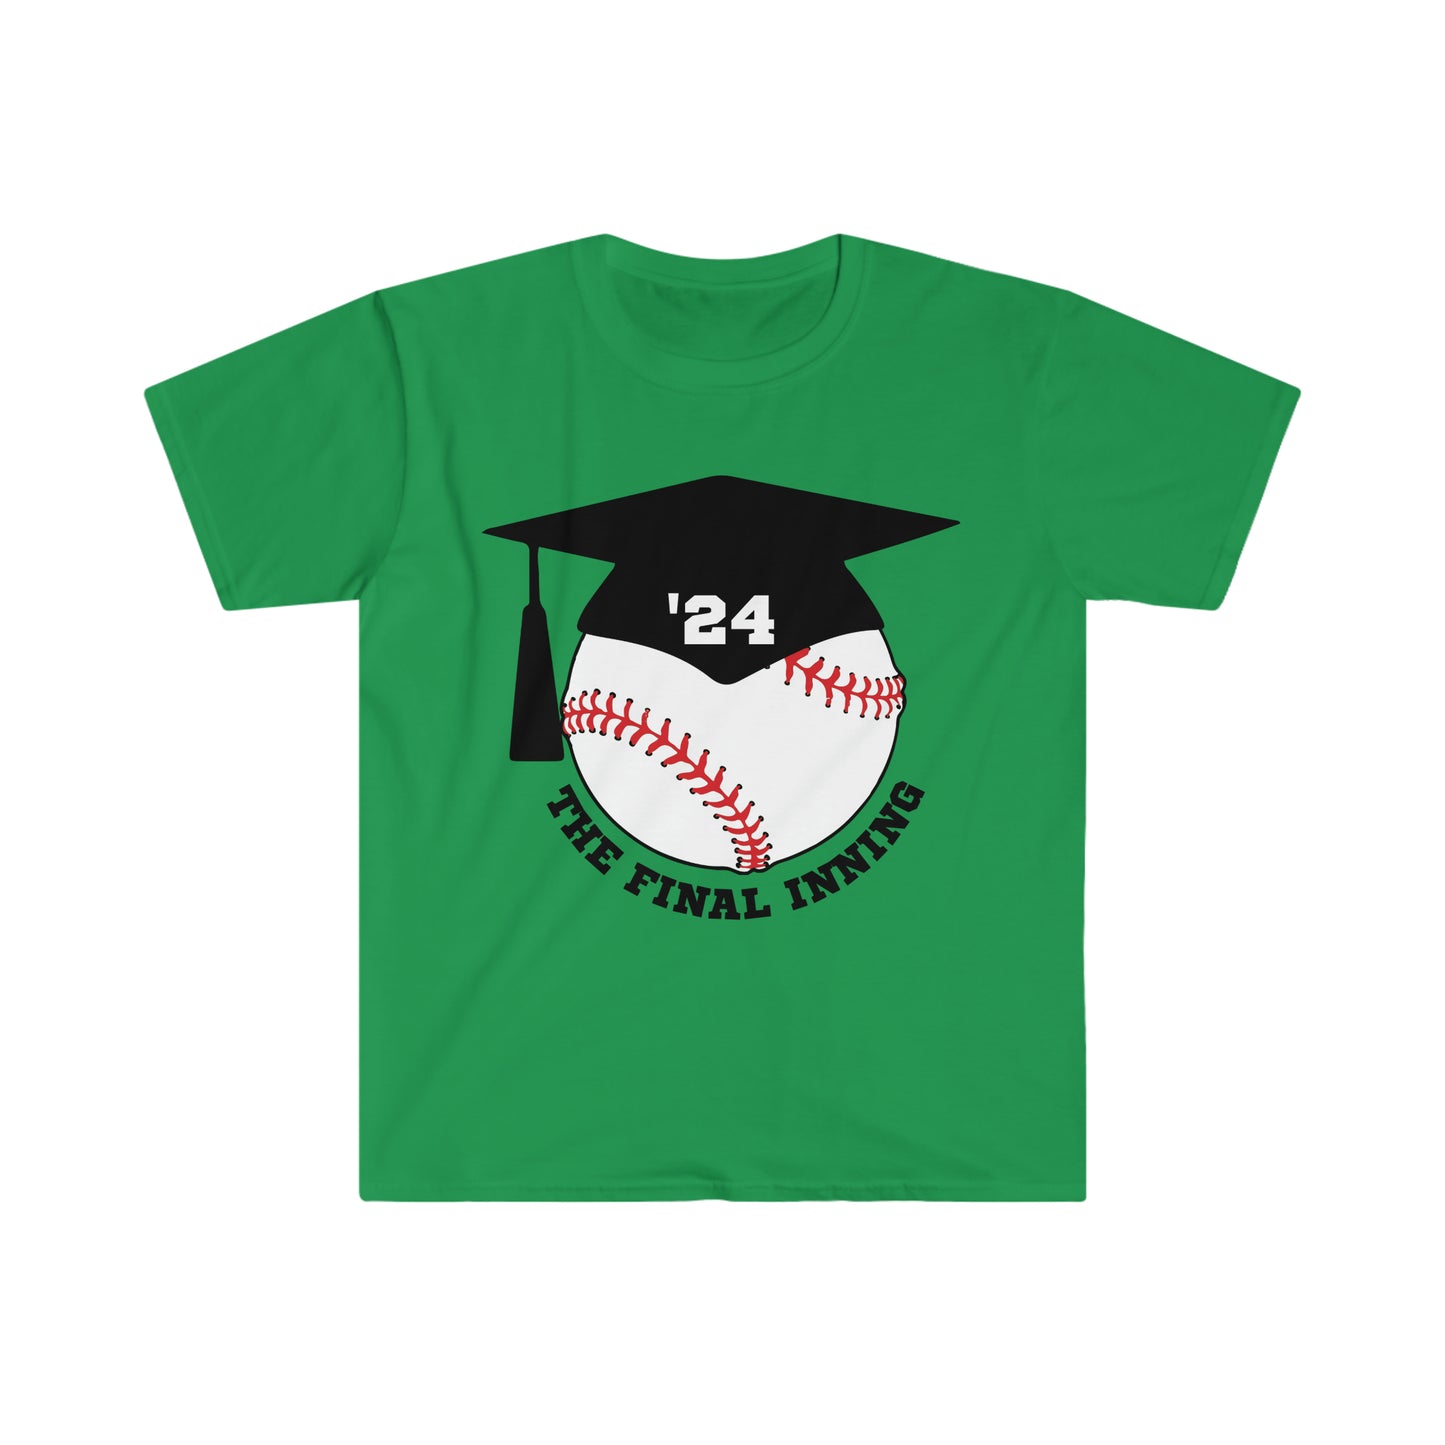 The Final Inning - Unisex Softstyle T-Shirt